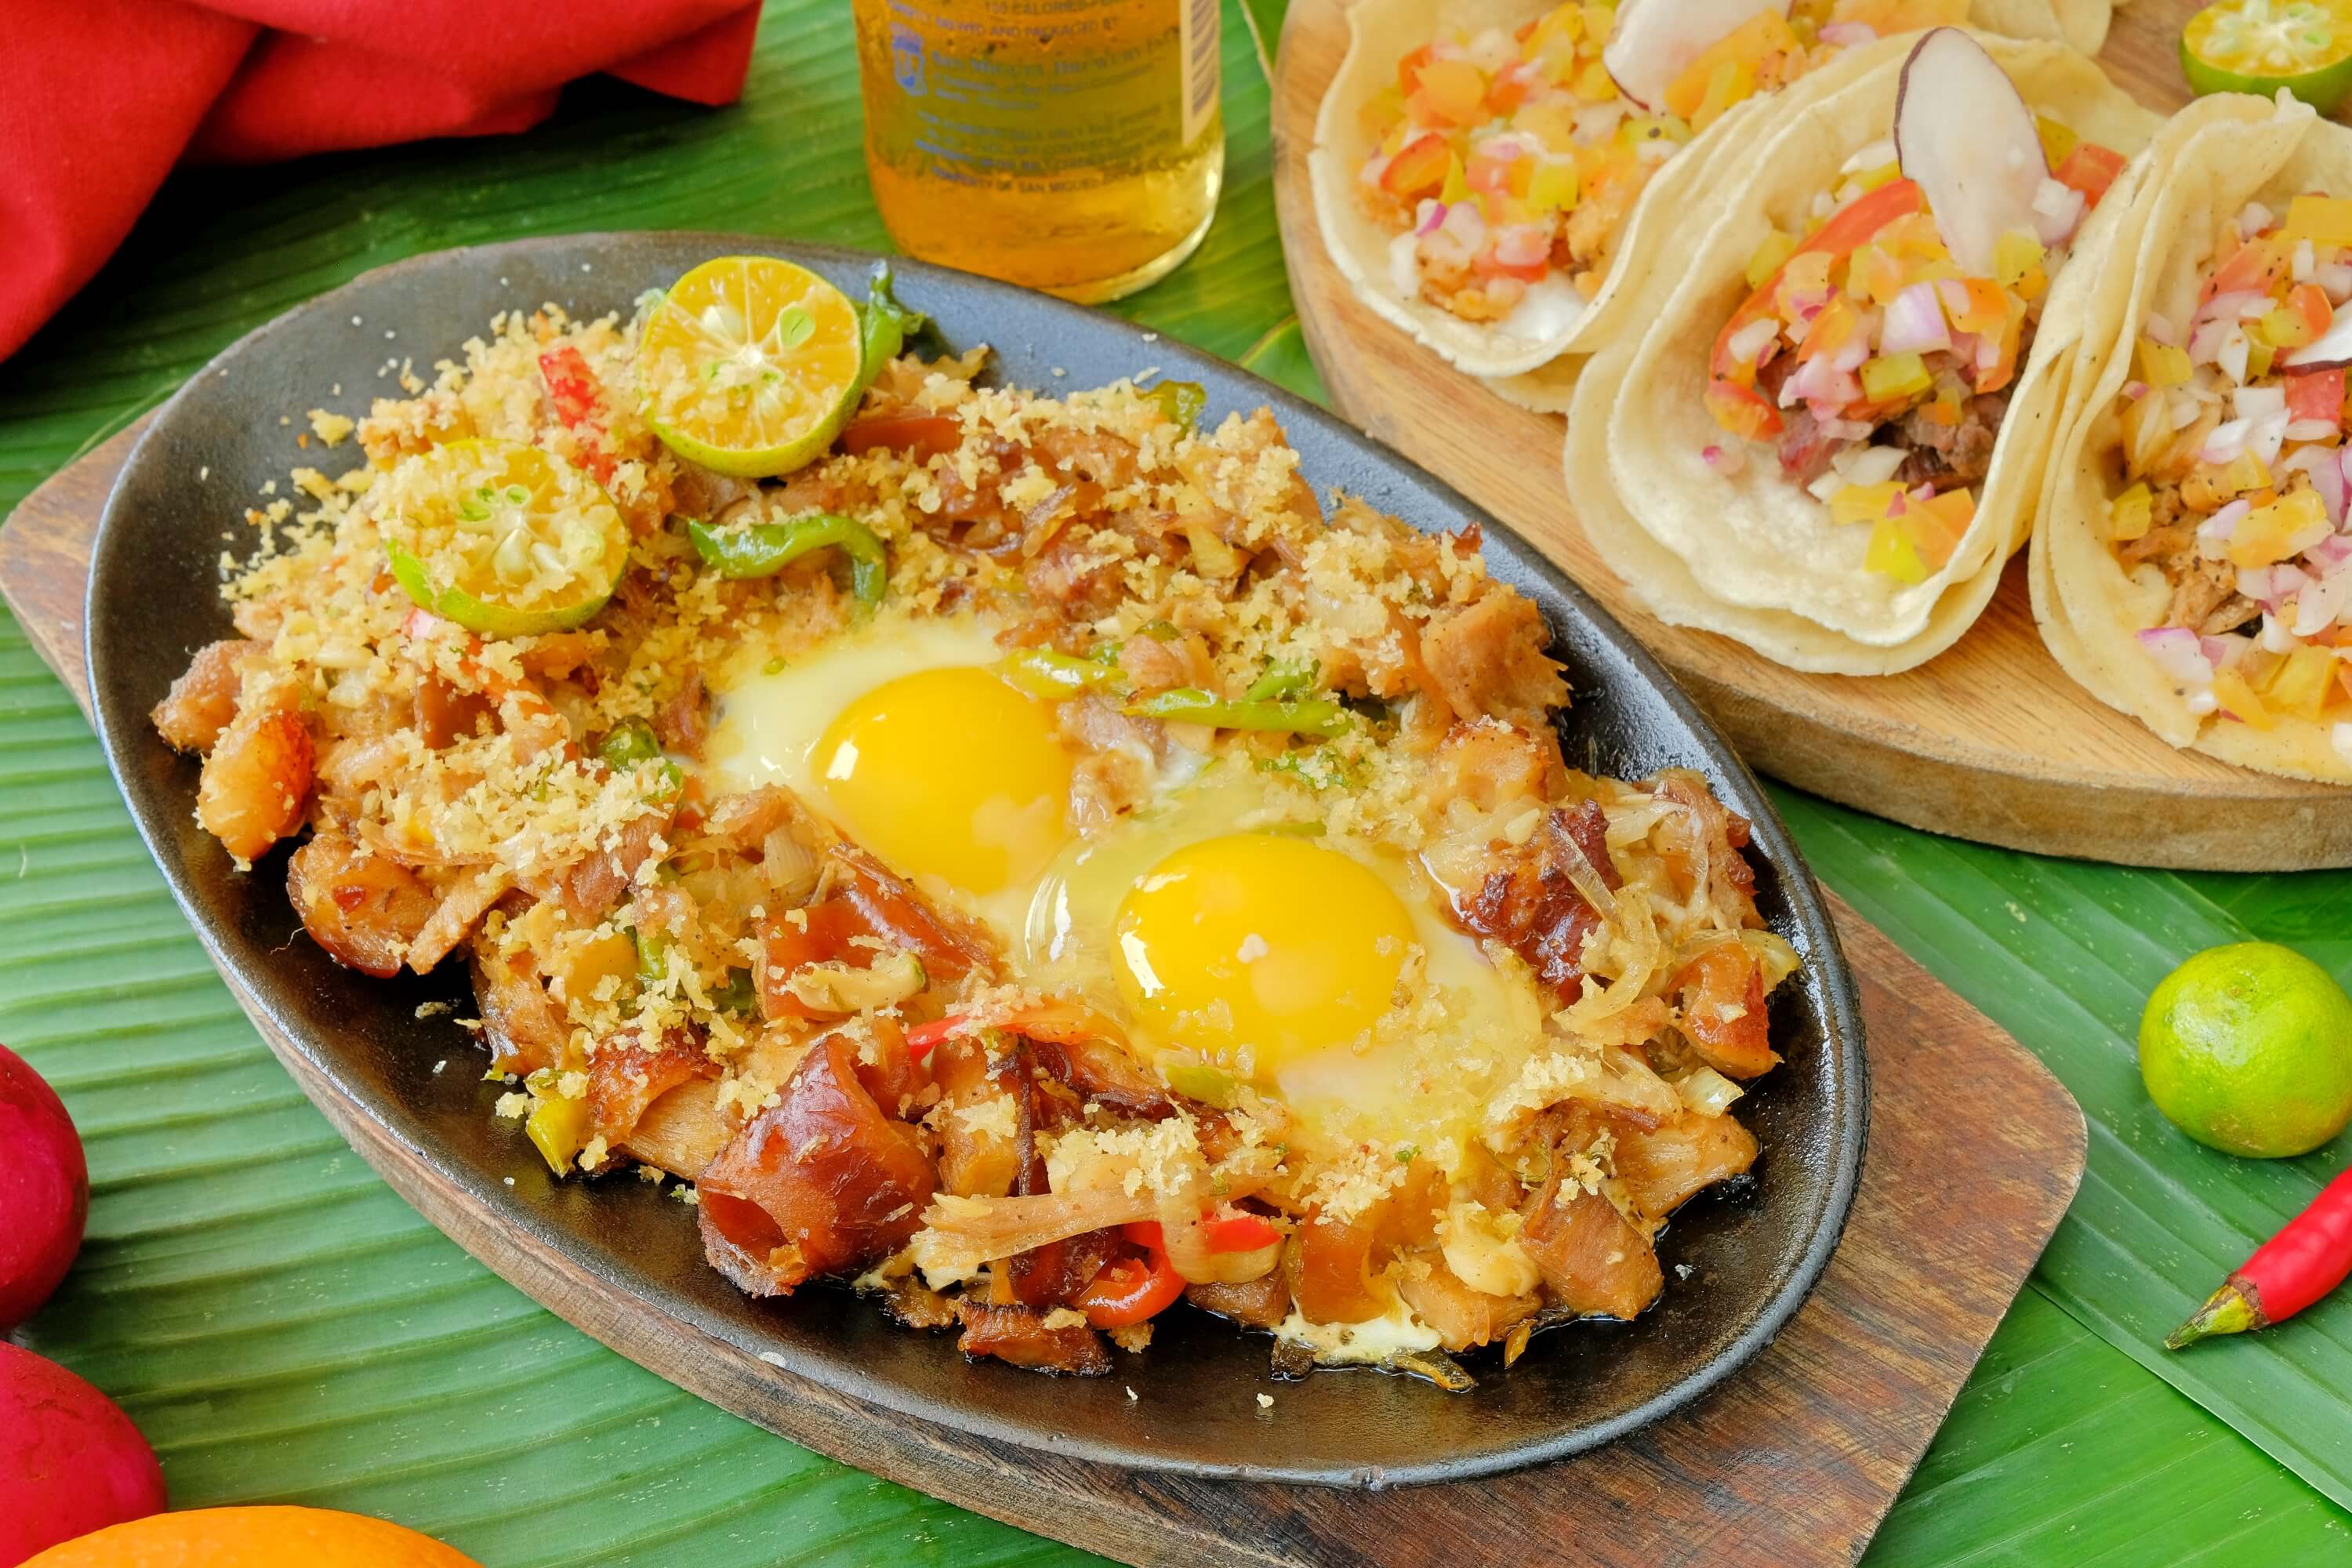 Lechon sisig by KKB Seafood.